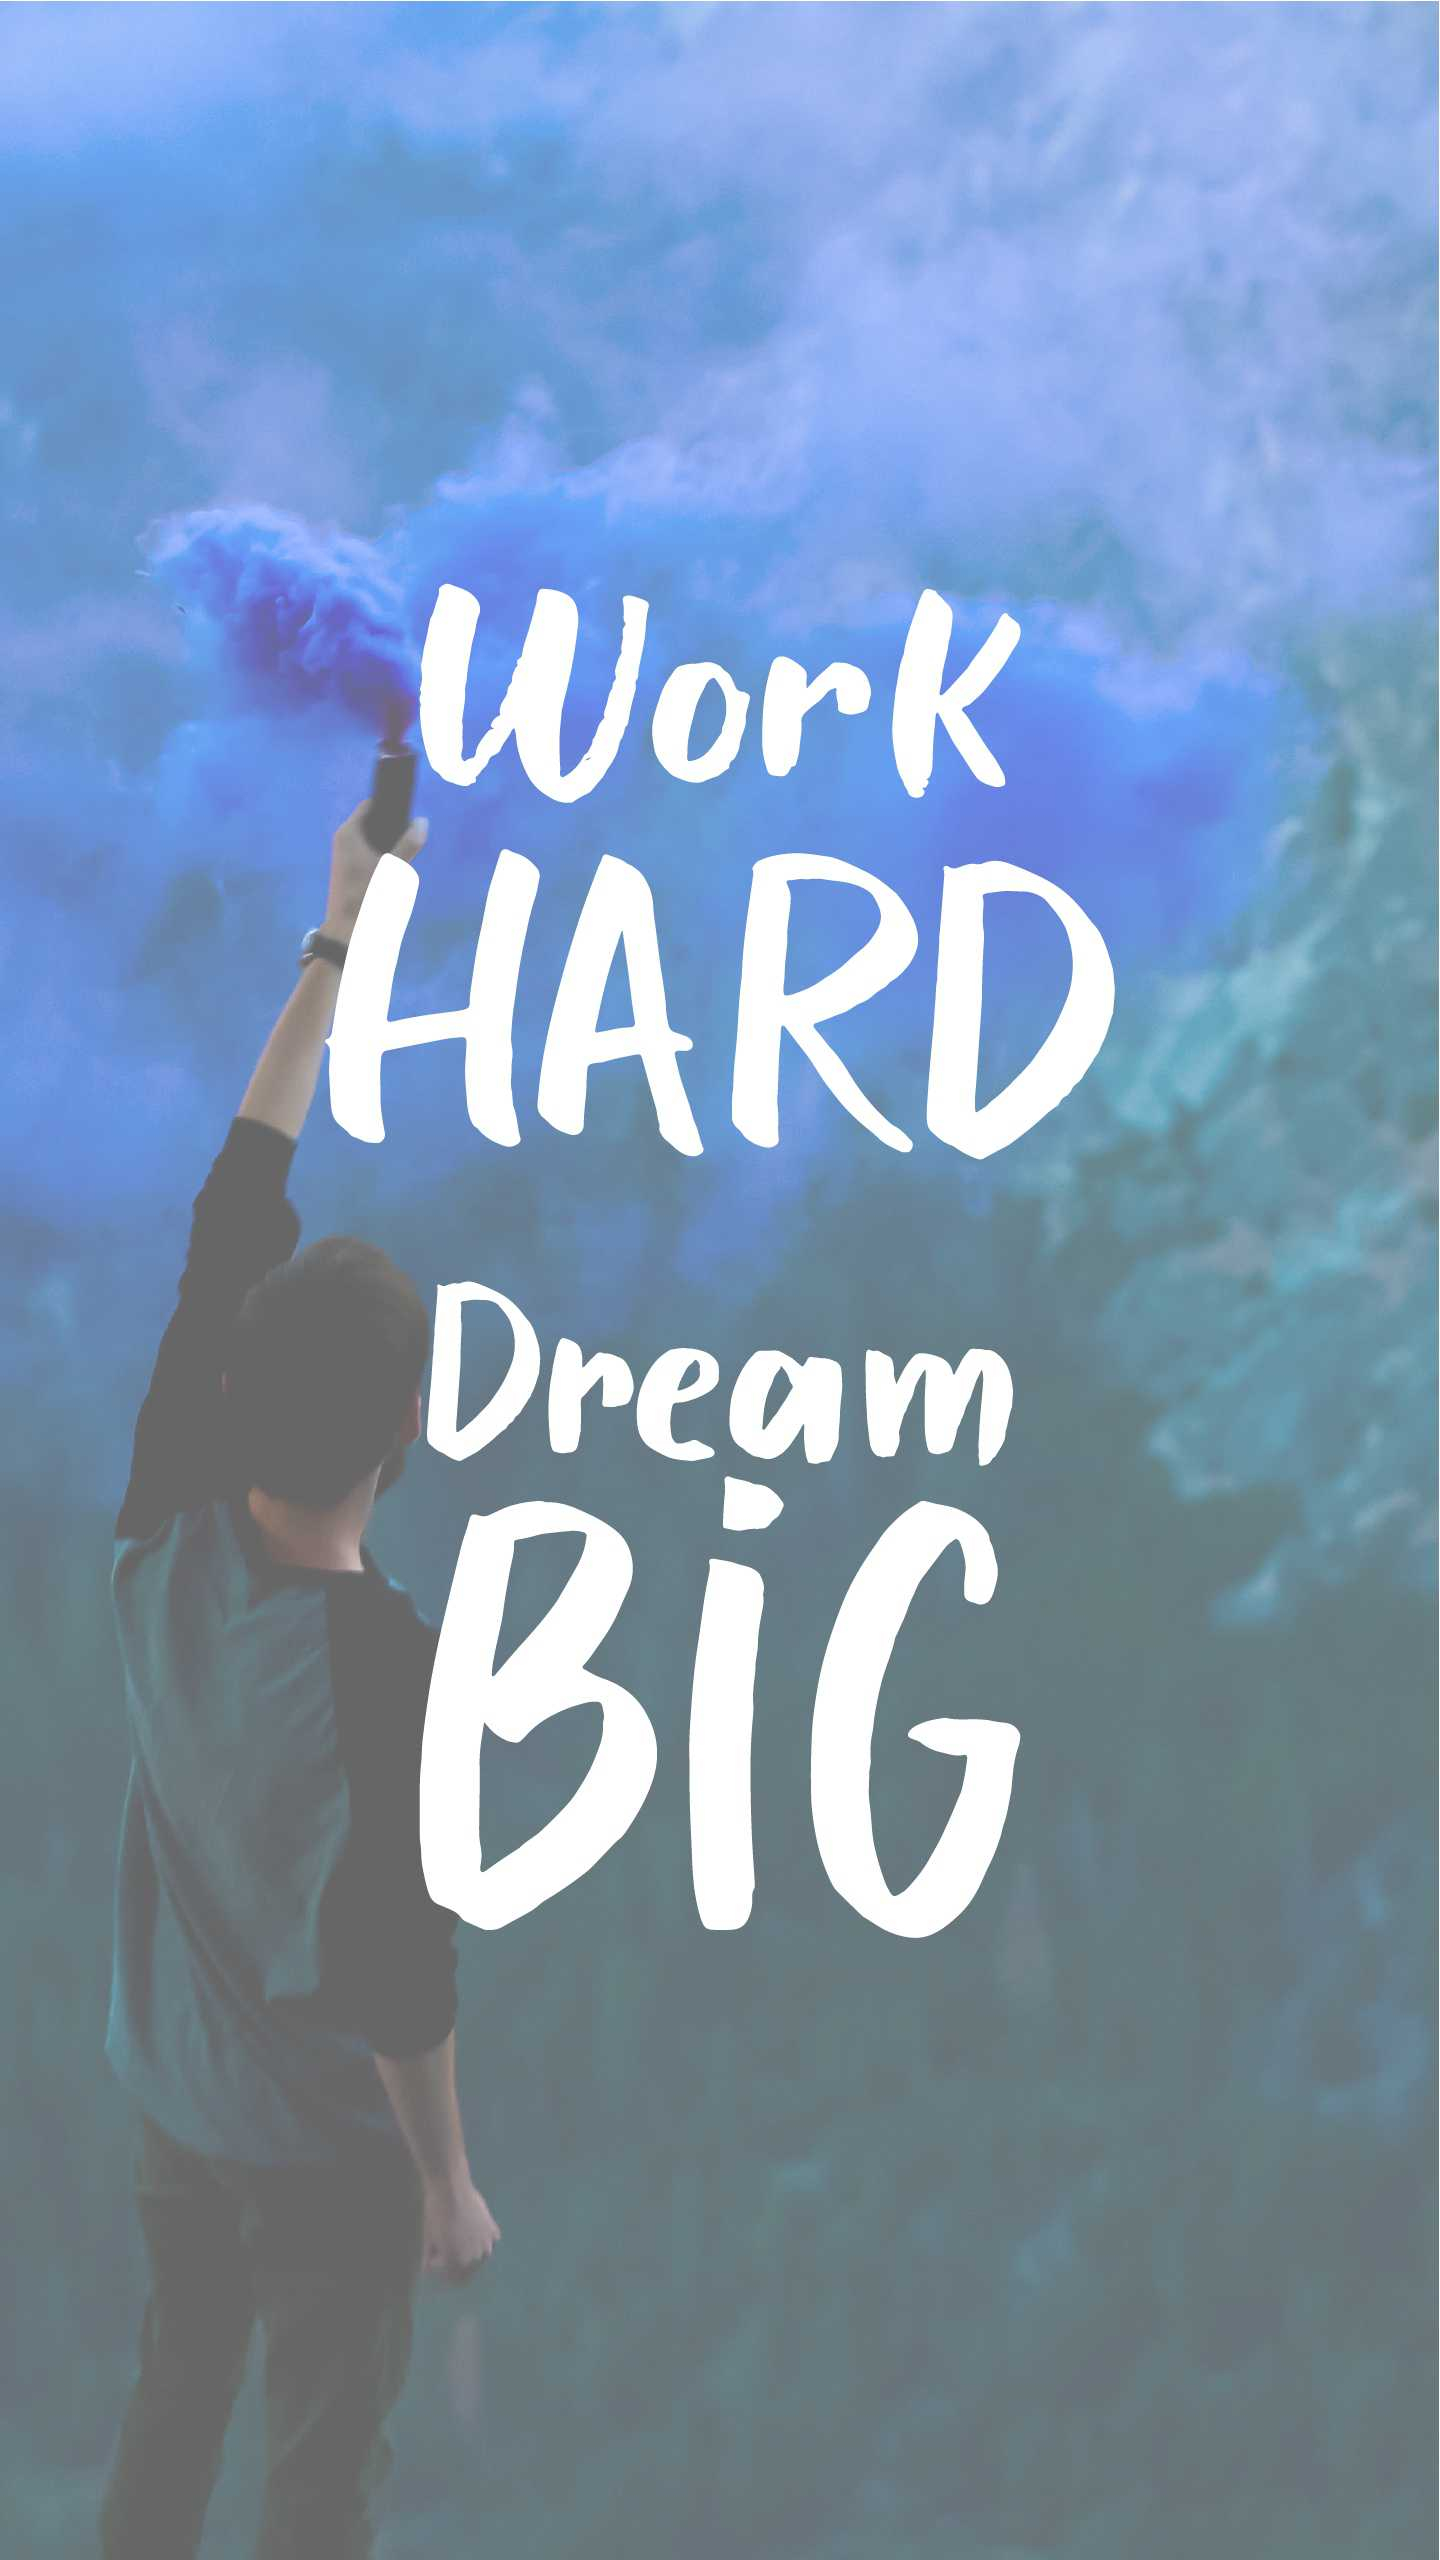 Work Hard Dream Big Wallpapers and Backgrounds 4K, HD, Dual Screen